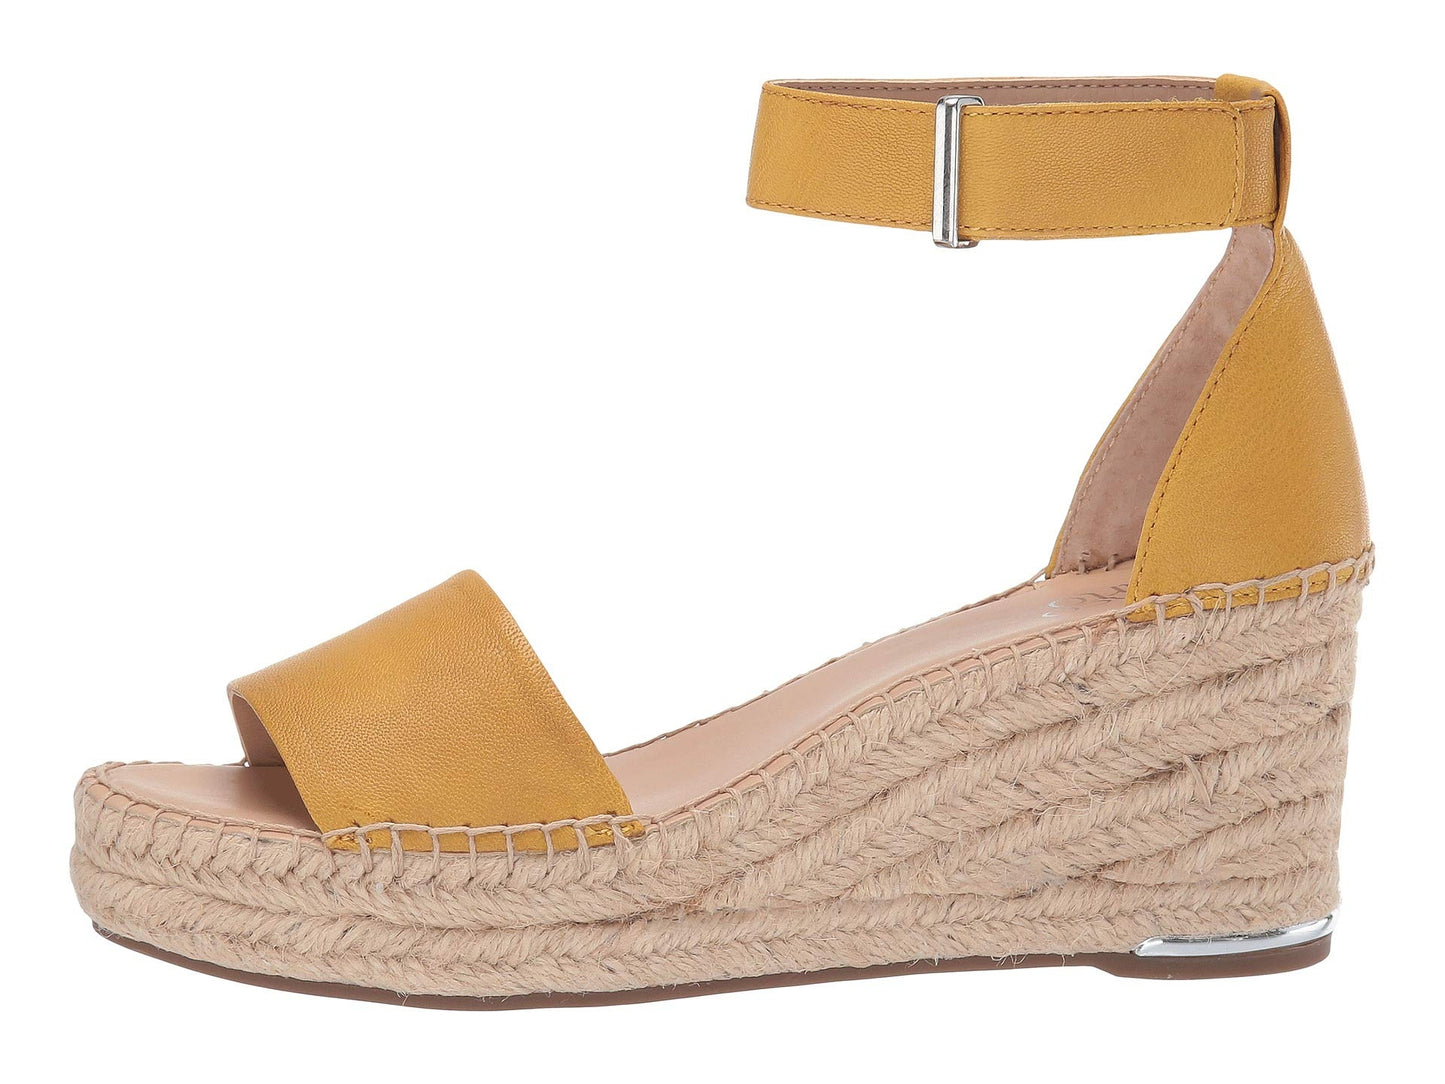 Clemens Summer Yellow Leather Franco Sarto Wedge Sandals